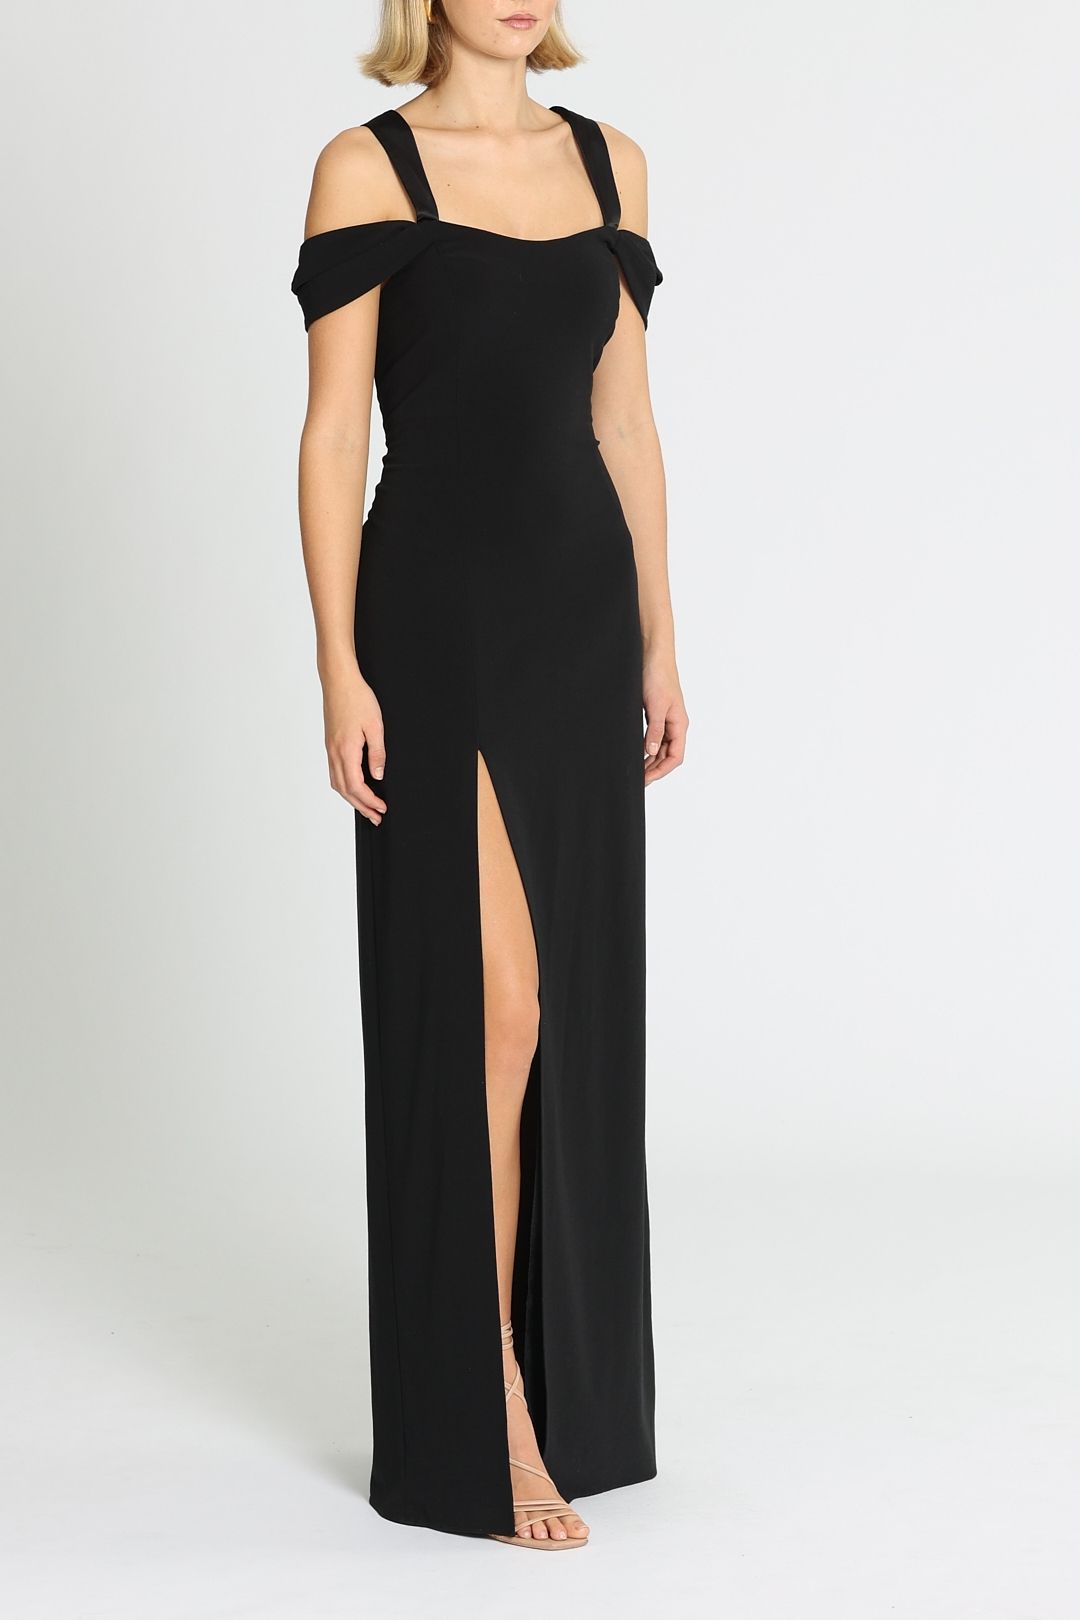 Cold Shoulder Fitted Gown by Halston Heritage for Rent